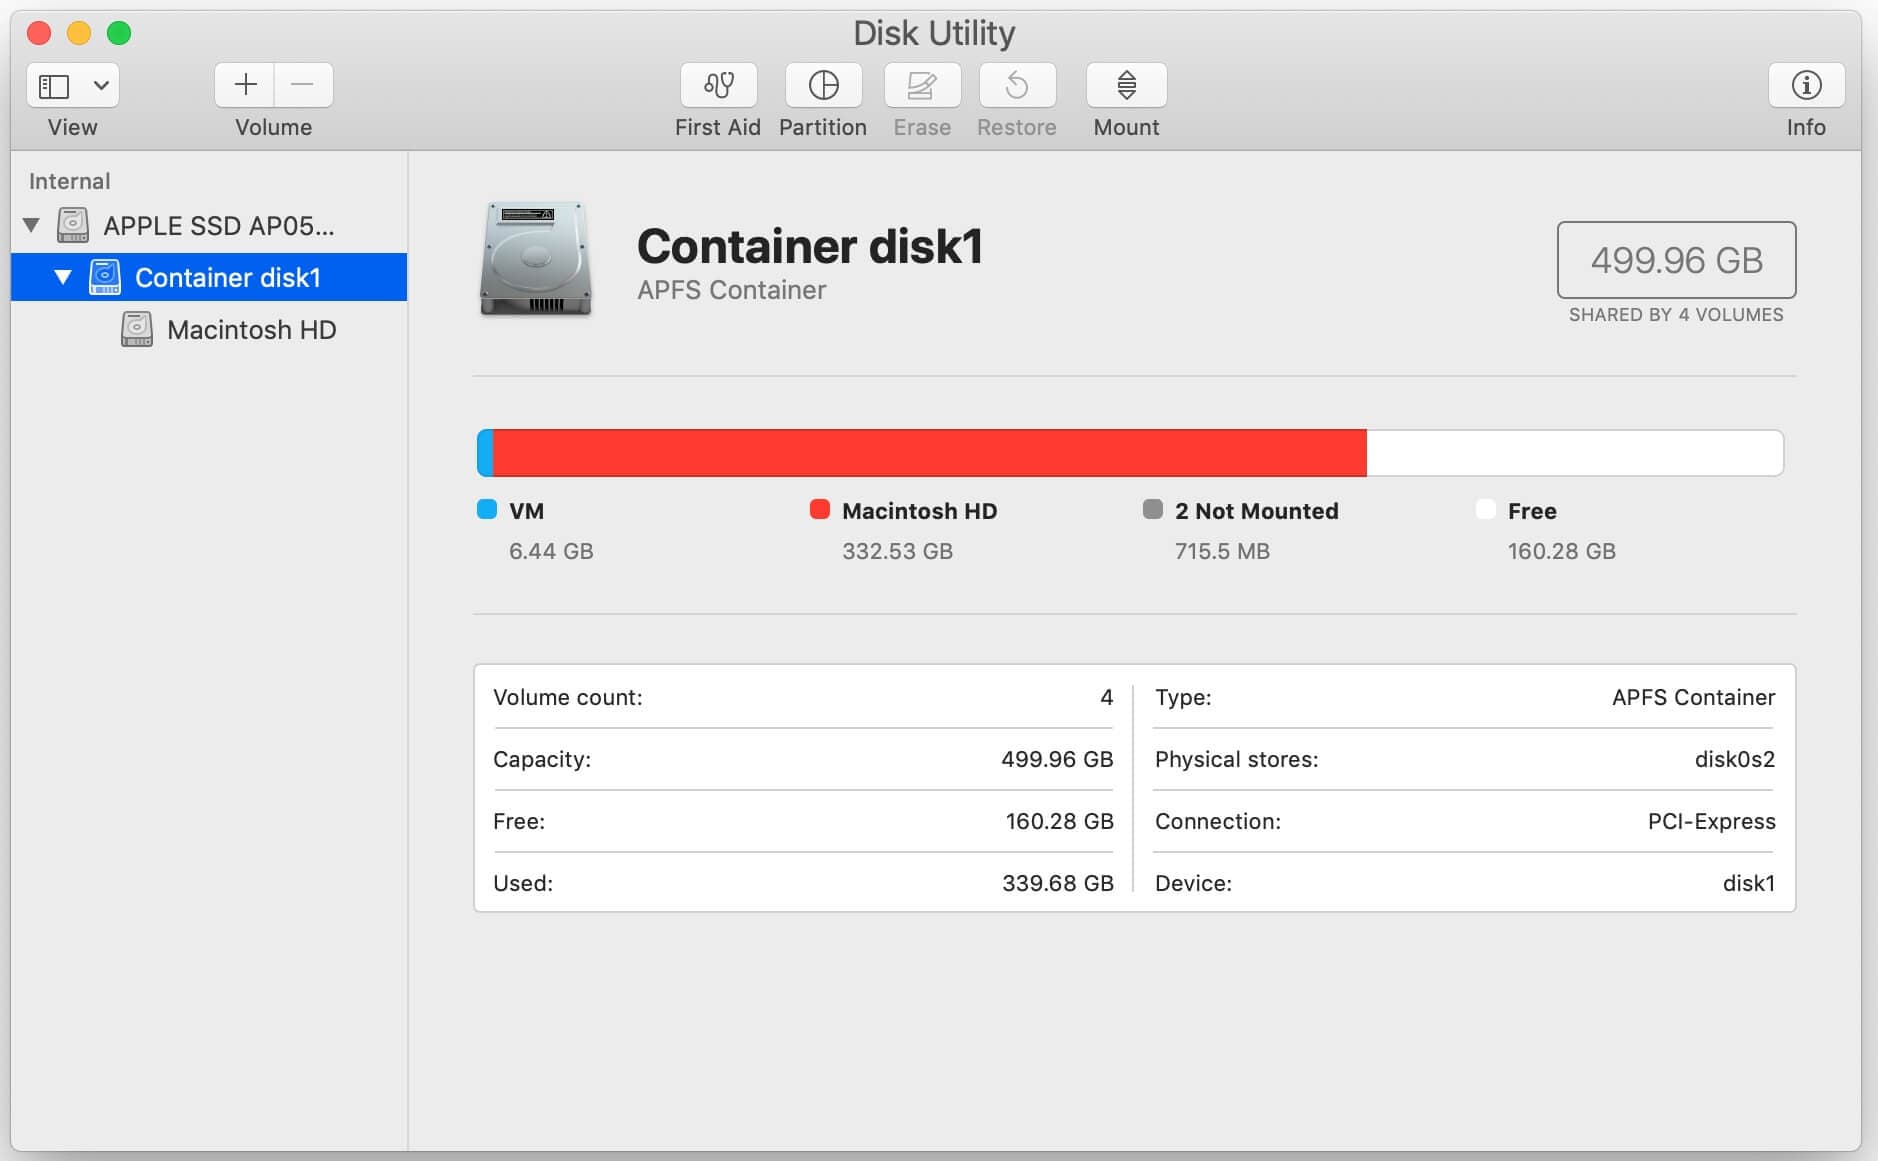 usb drive appearing in the disk utility dashboard